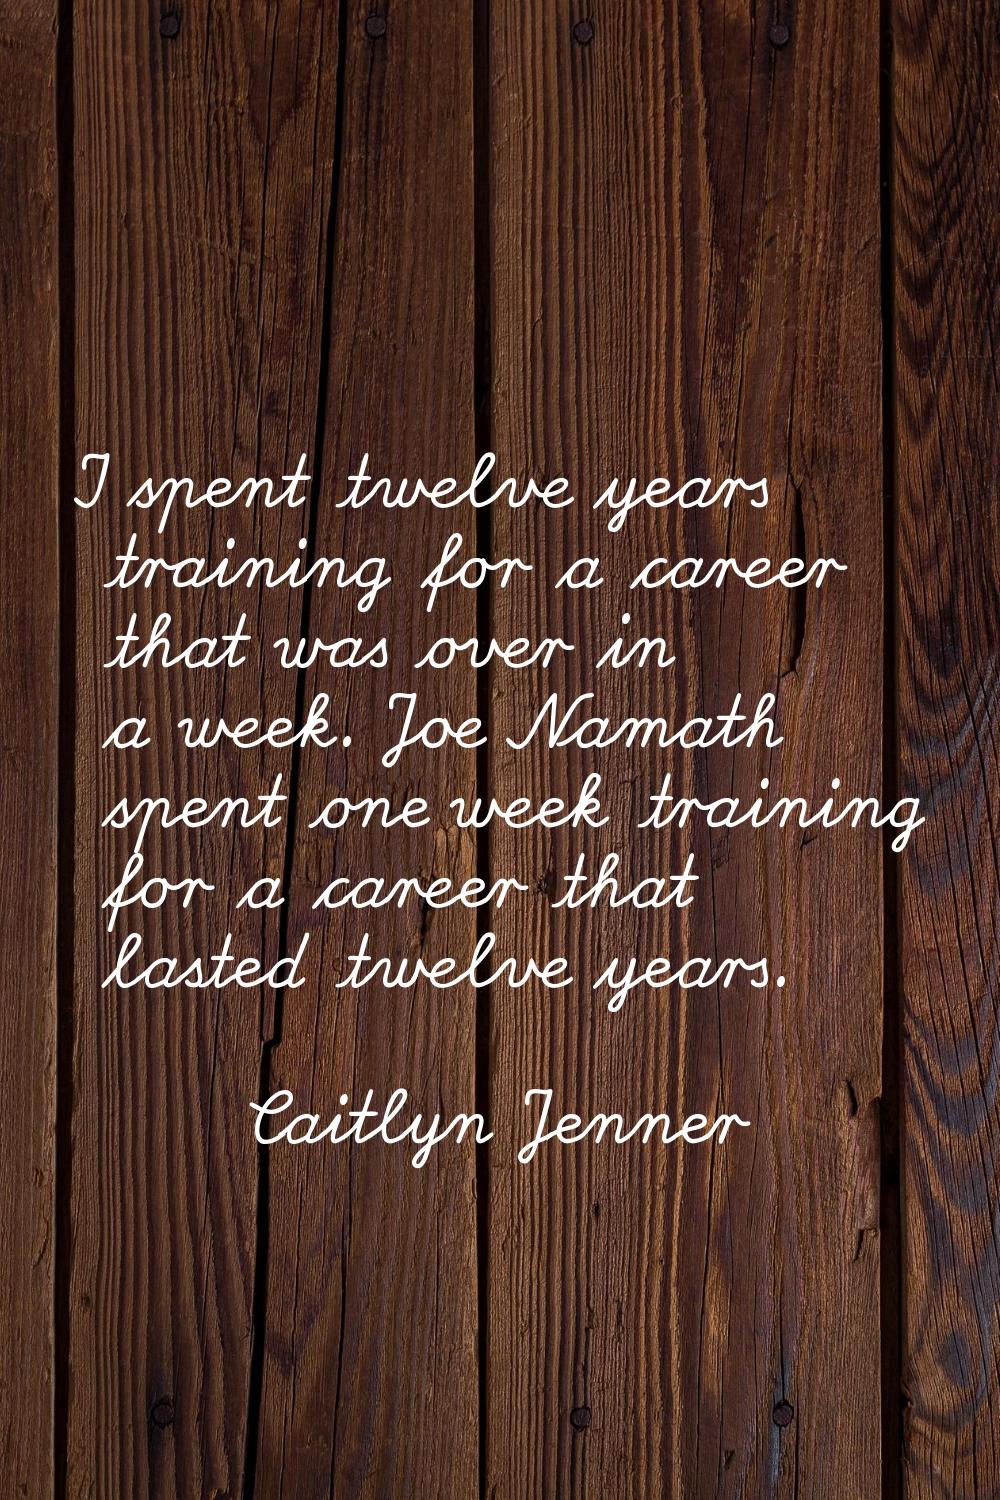 I spent twelve years training for a career that was over in a week. Joe Namath spent one week train